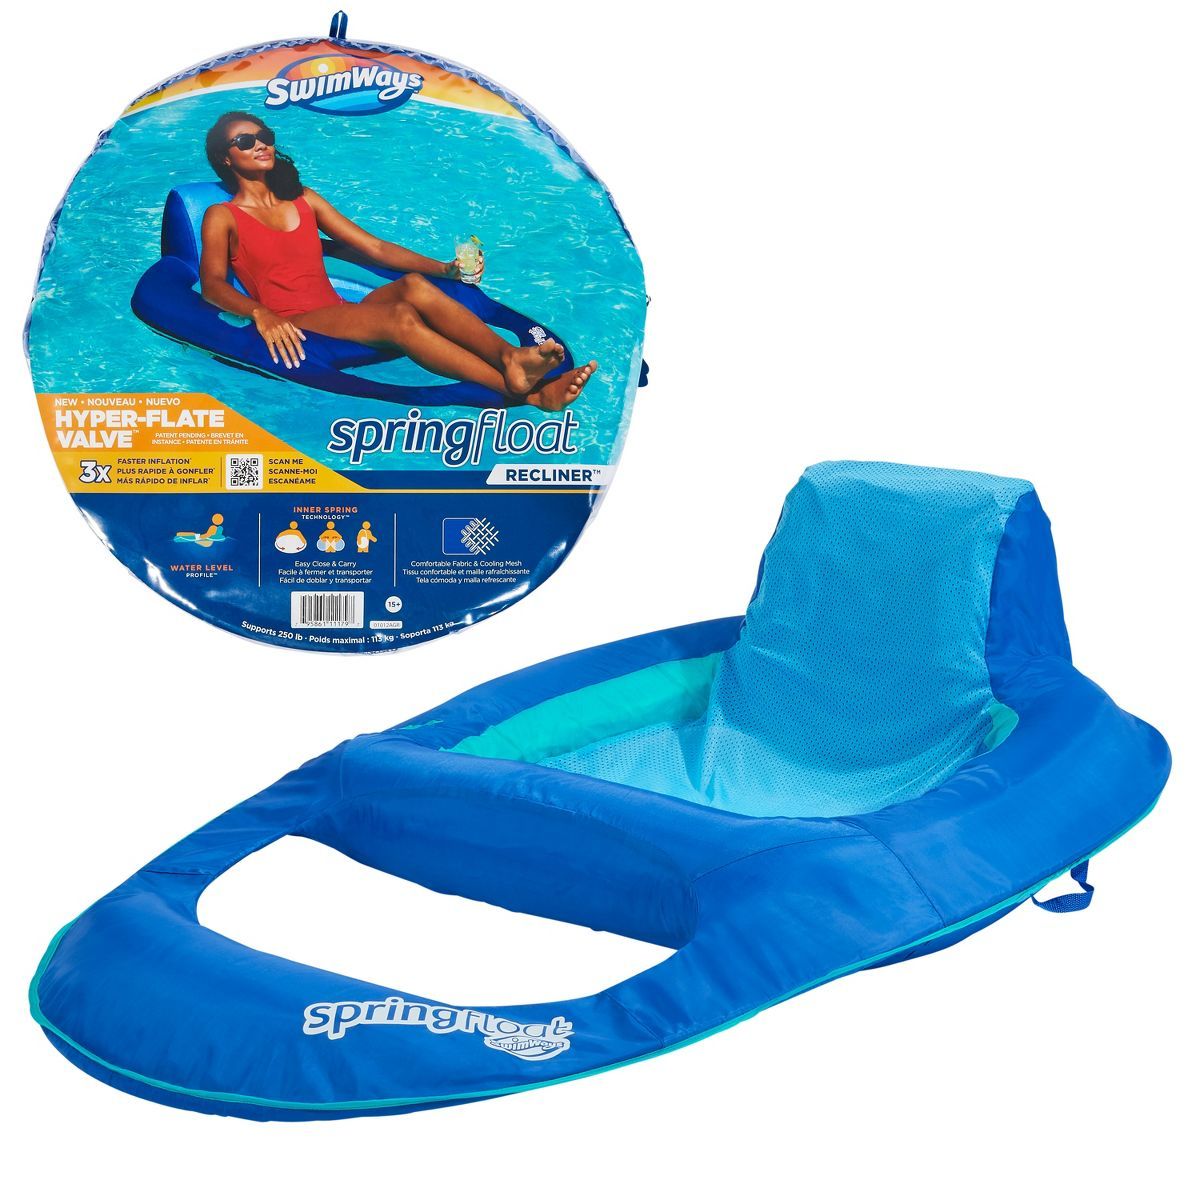 SwimWays Spring Float Recliner Swim Lounger for Pool or Lake with Hyper-Flate Valve - Blue | Target